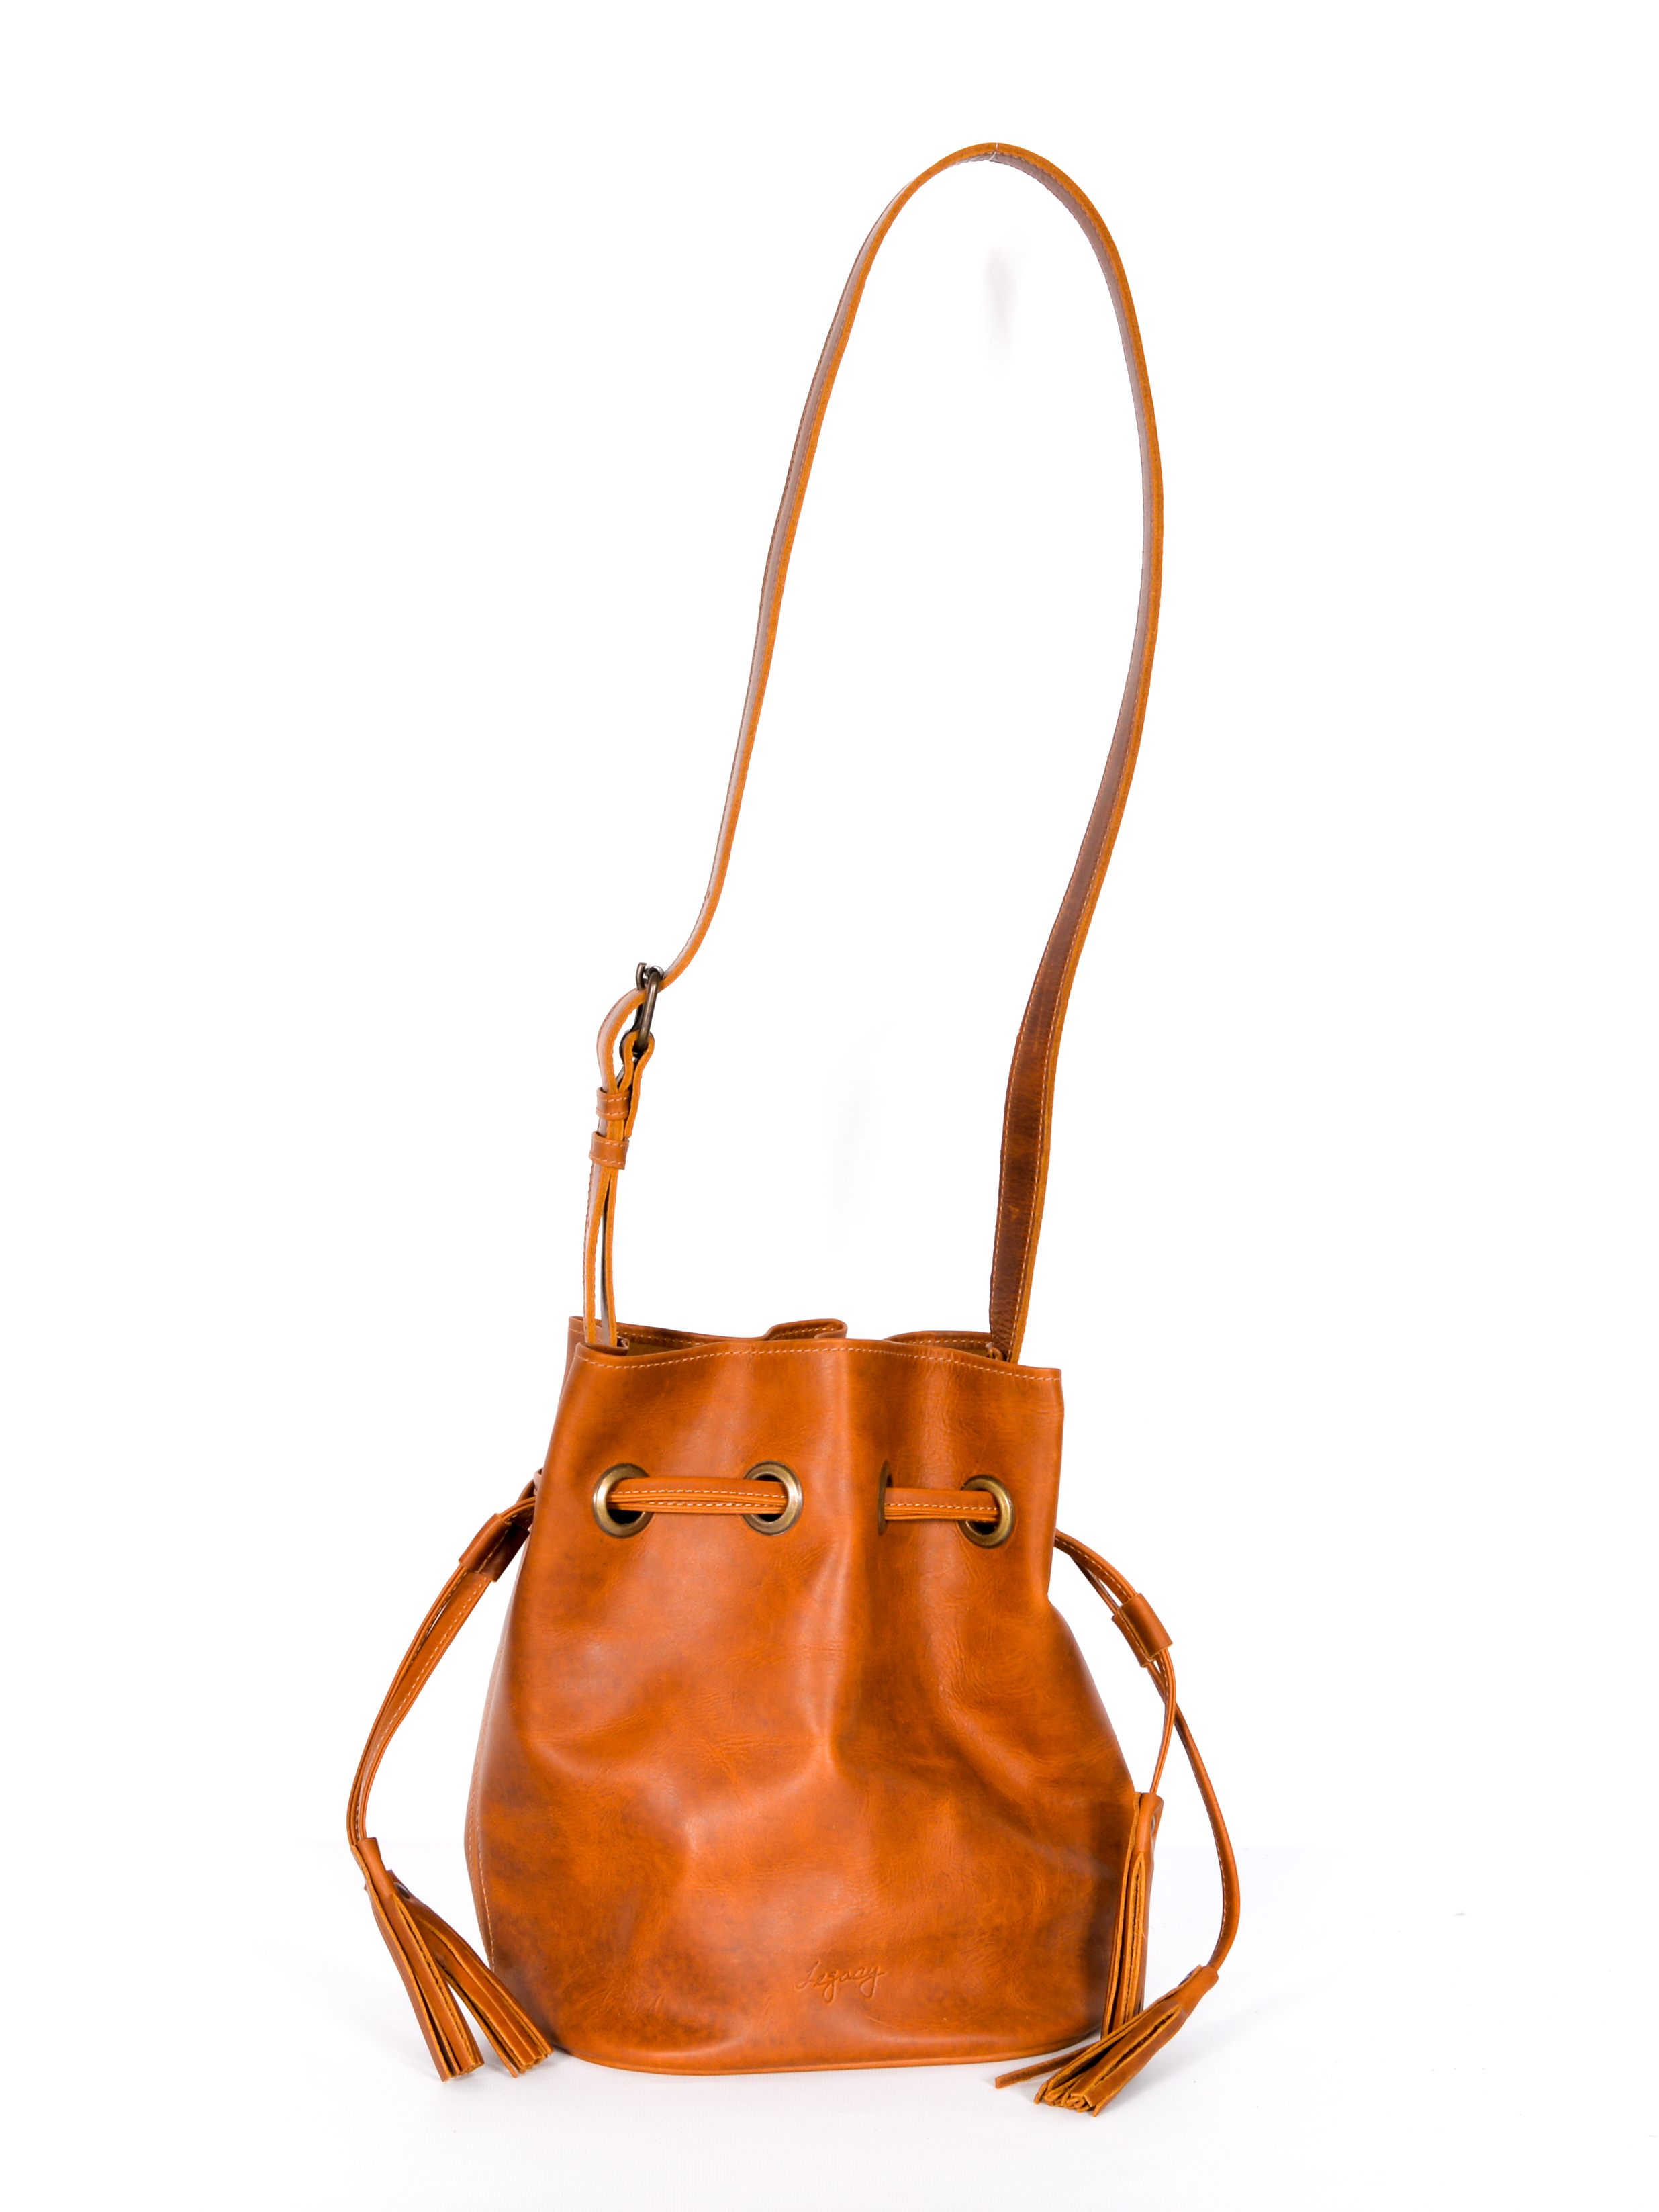 Leather Drawstring Bucket Bag - The Correa by the Oak River Company